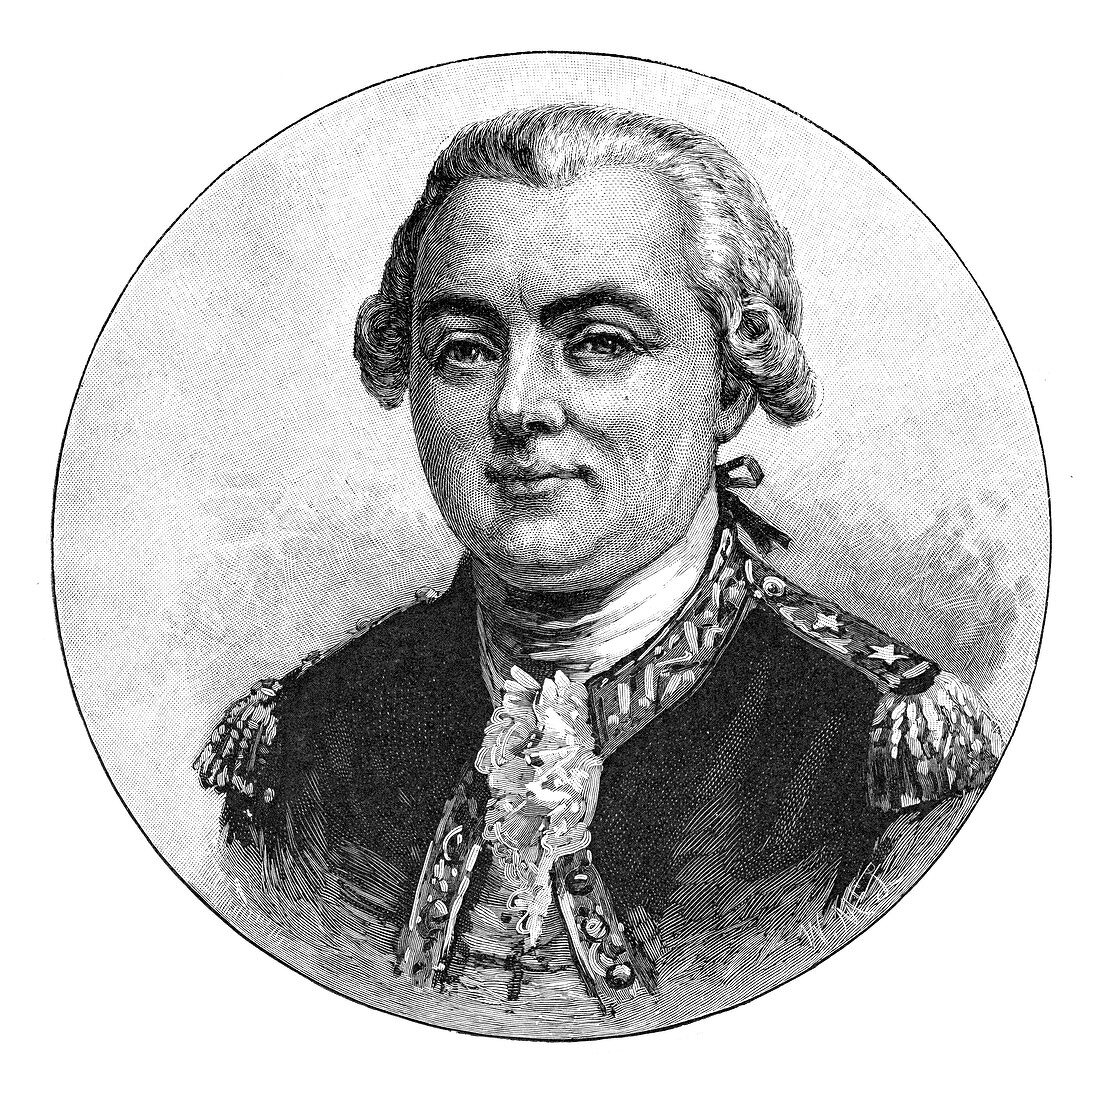 Jean Francois Galaup, French naval officer and explorer